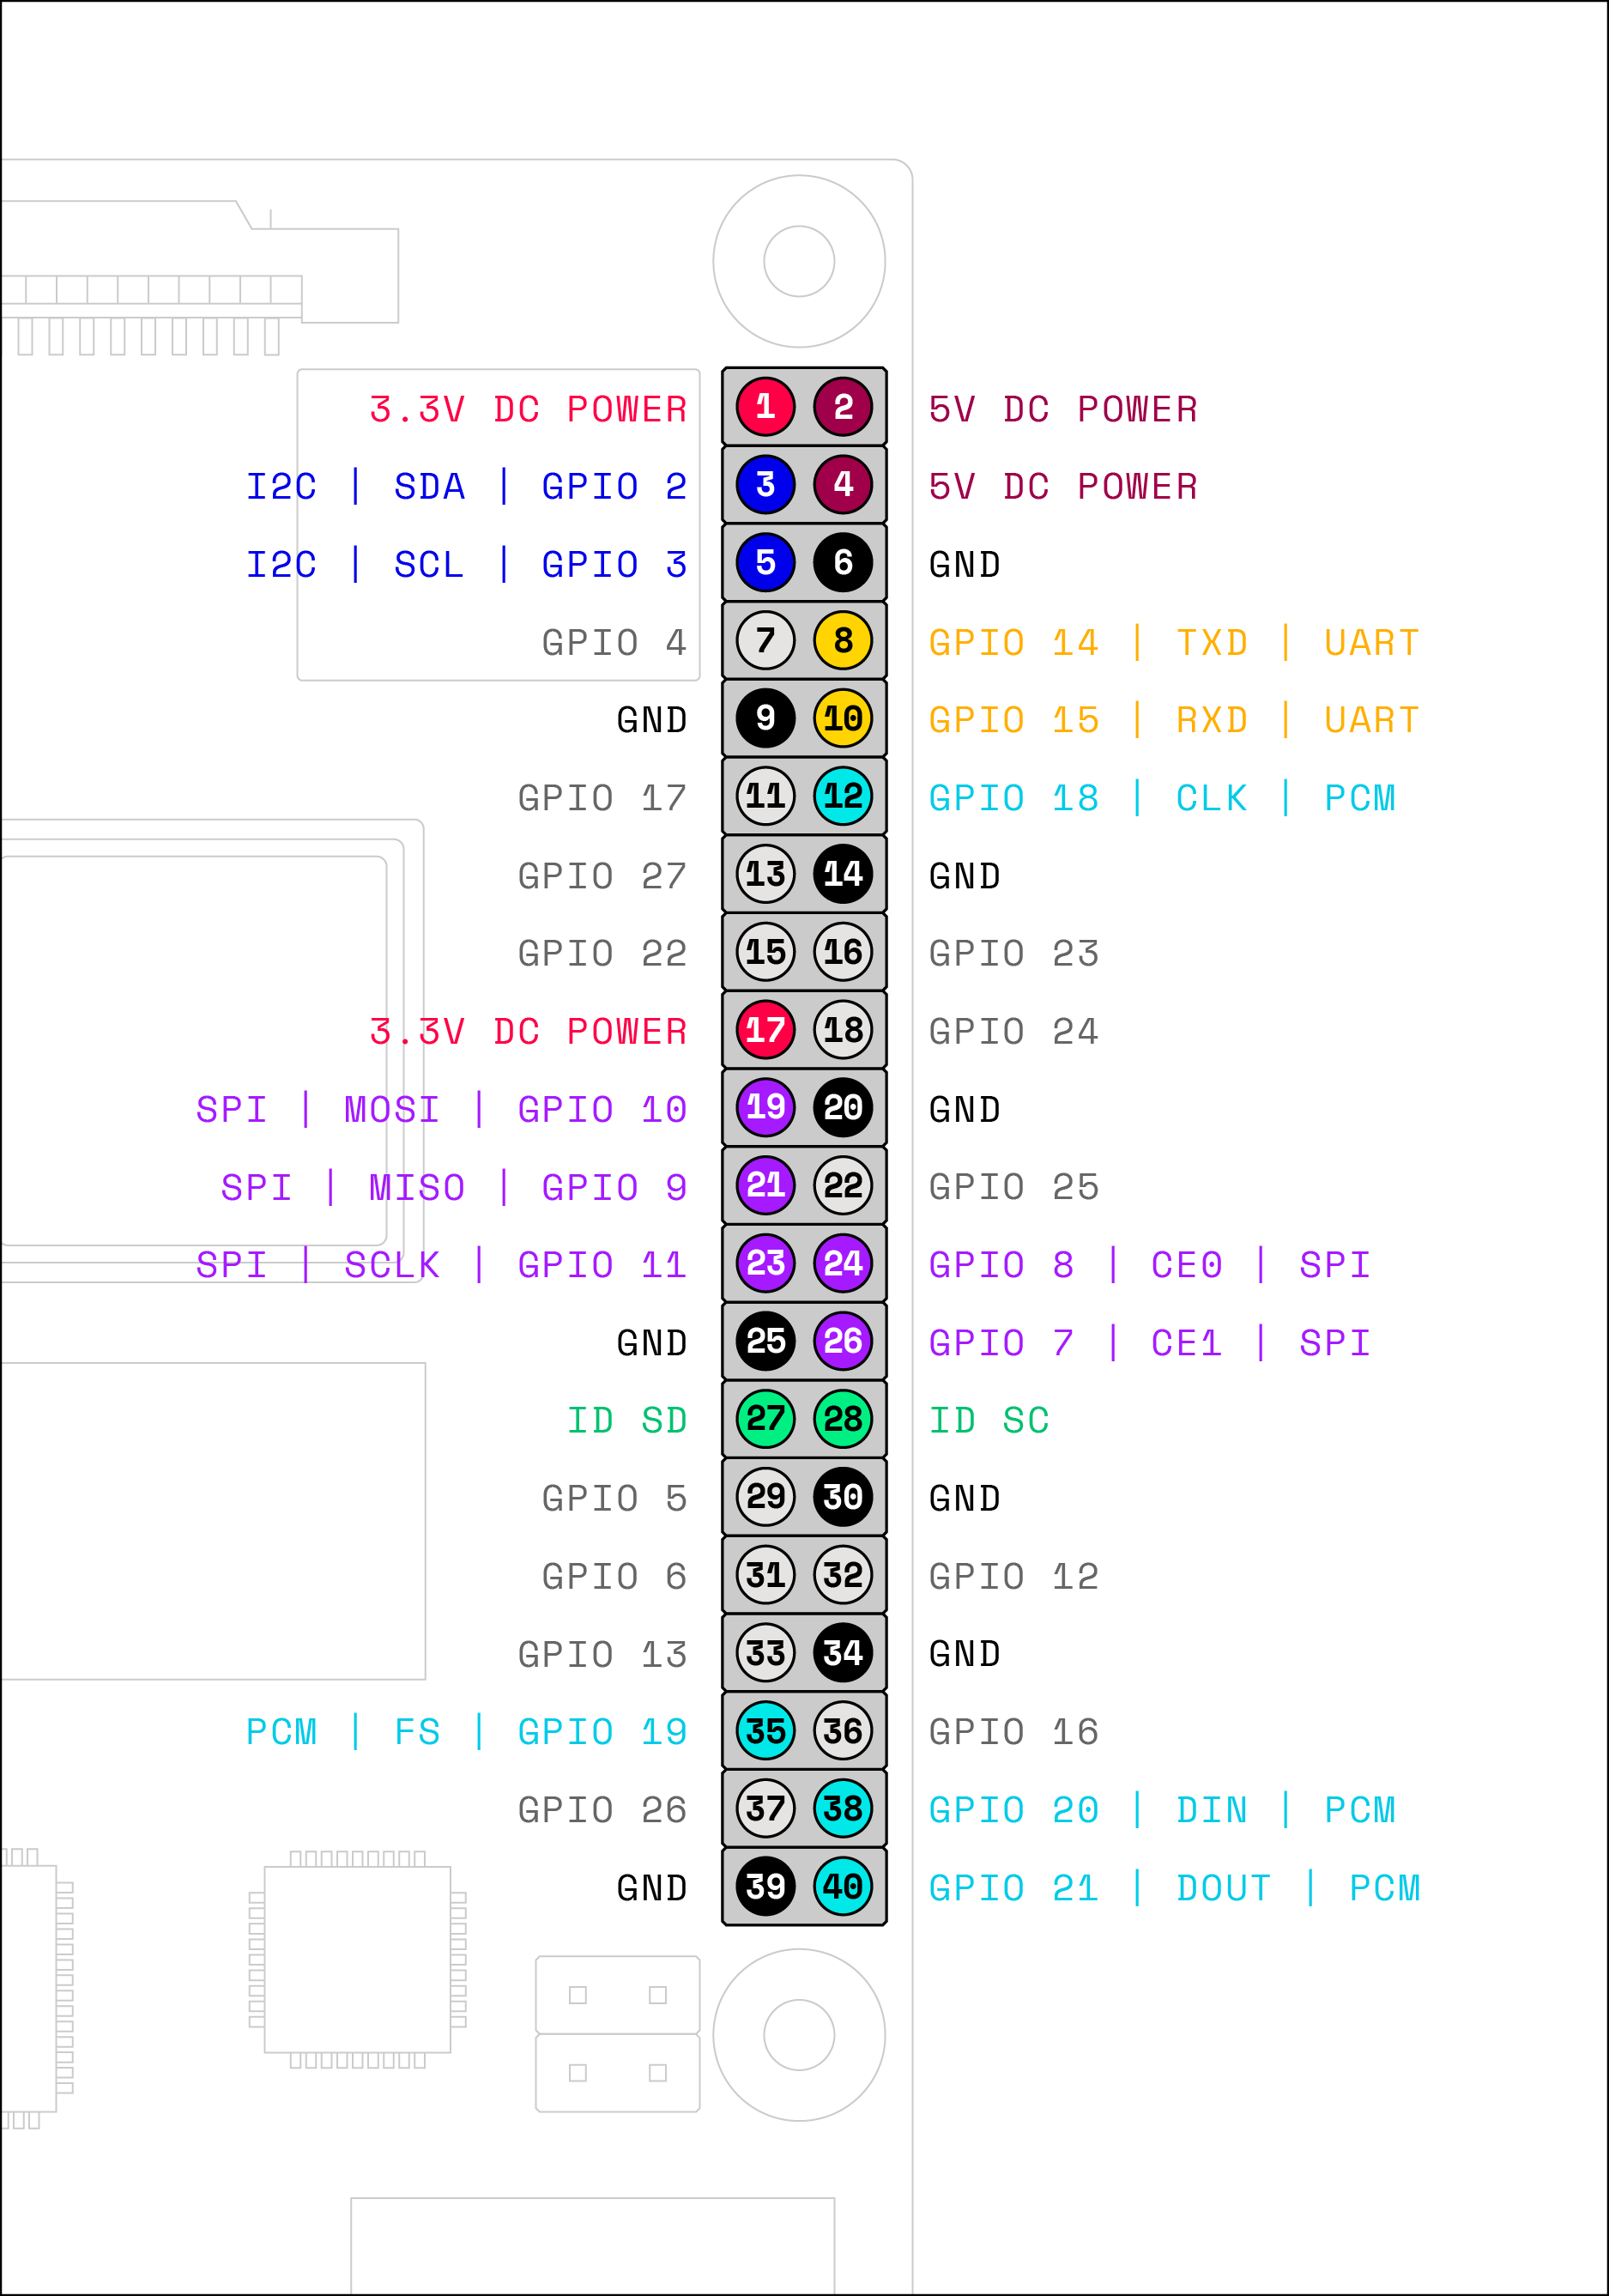 Diagram showing all of the GPIO pins on a Raspberry Pi 4 and their corresponding pin number and function.